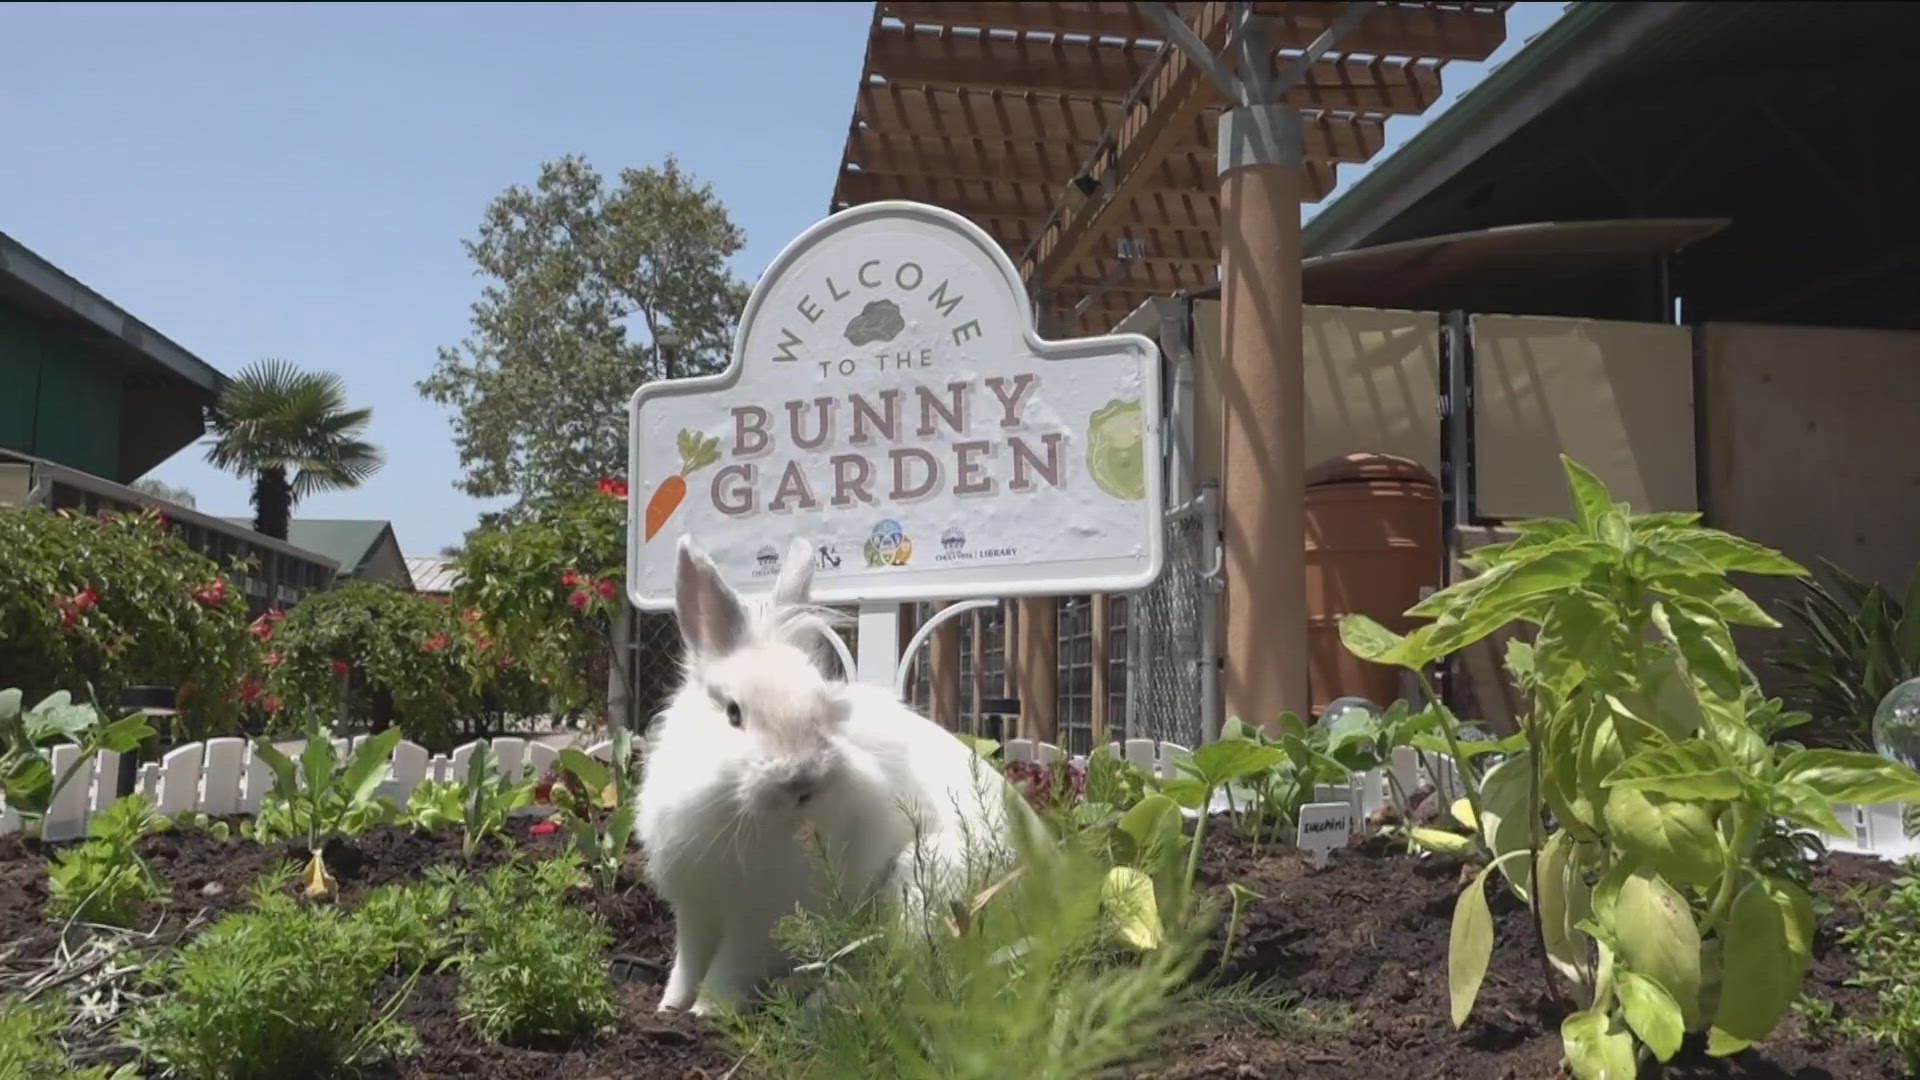 From their healthy diet, floppy ears, curious little nose and cotton tail, the bunny is one of the best pets. Several are up for adoption.